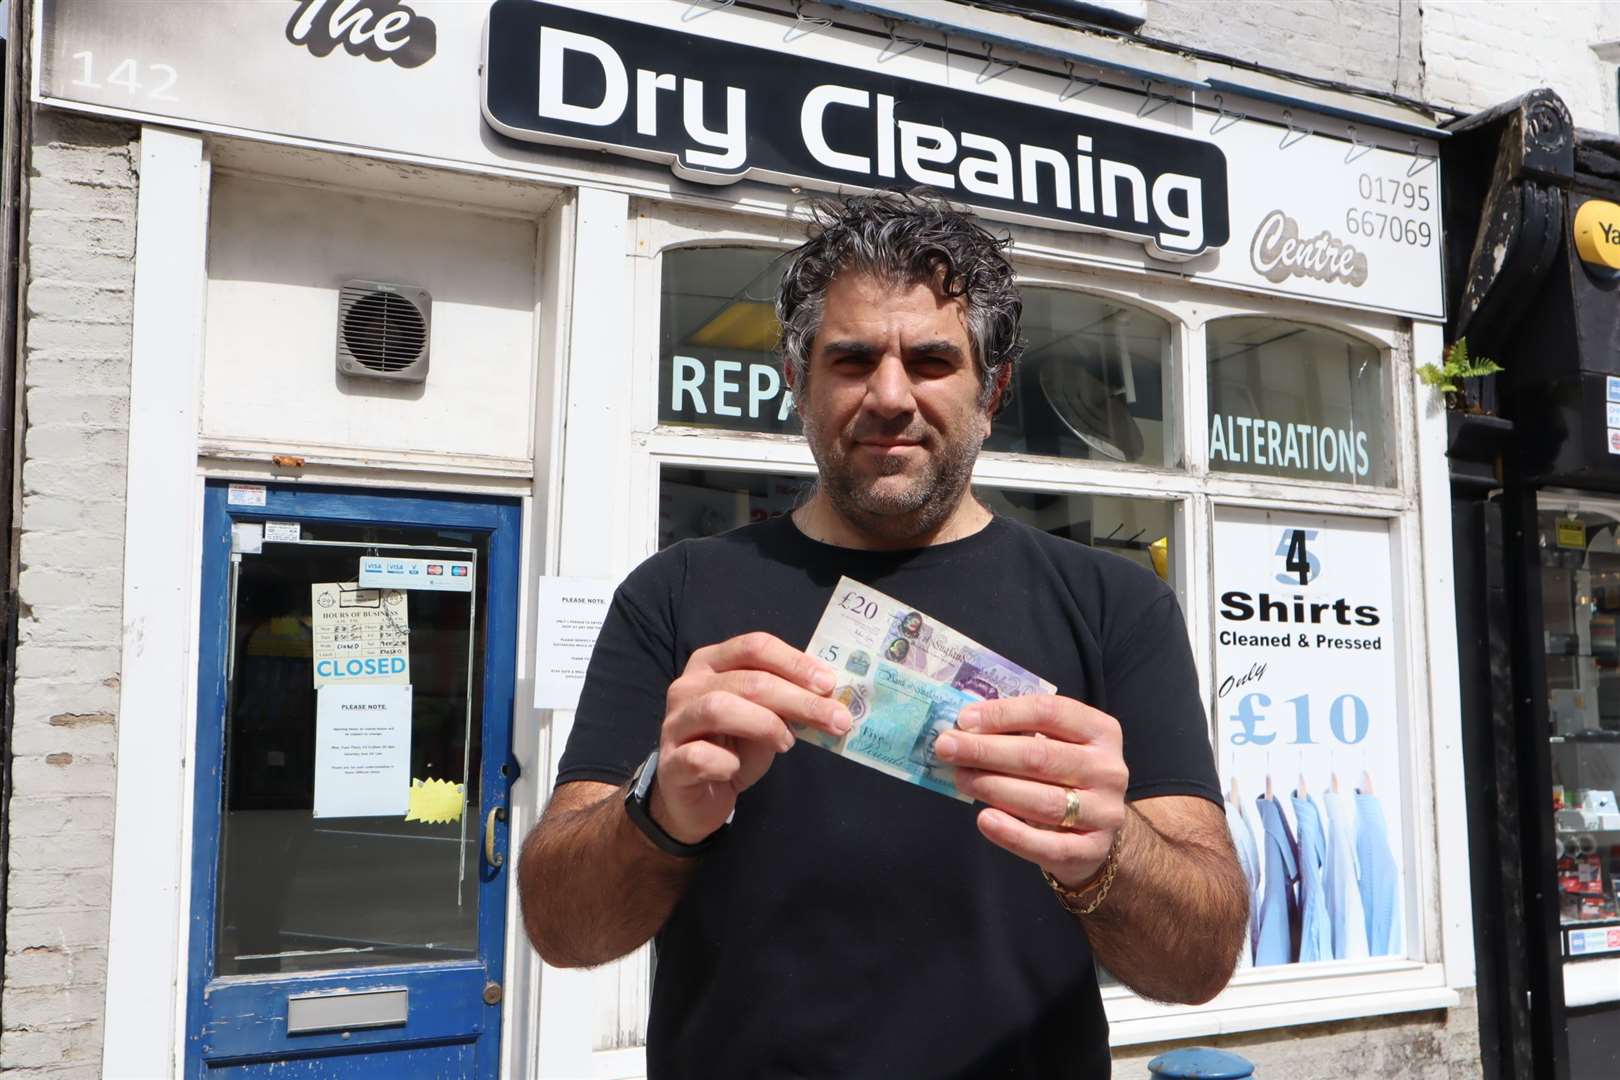 Sheerness dry cleaner Toygar Hassan fumed about the restrictions last year